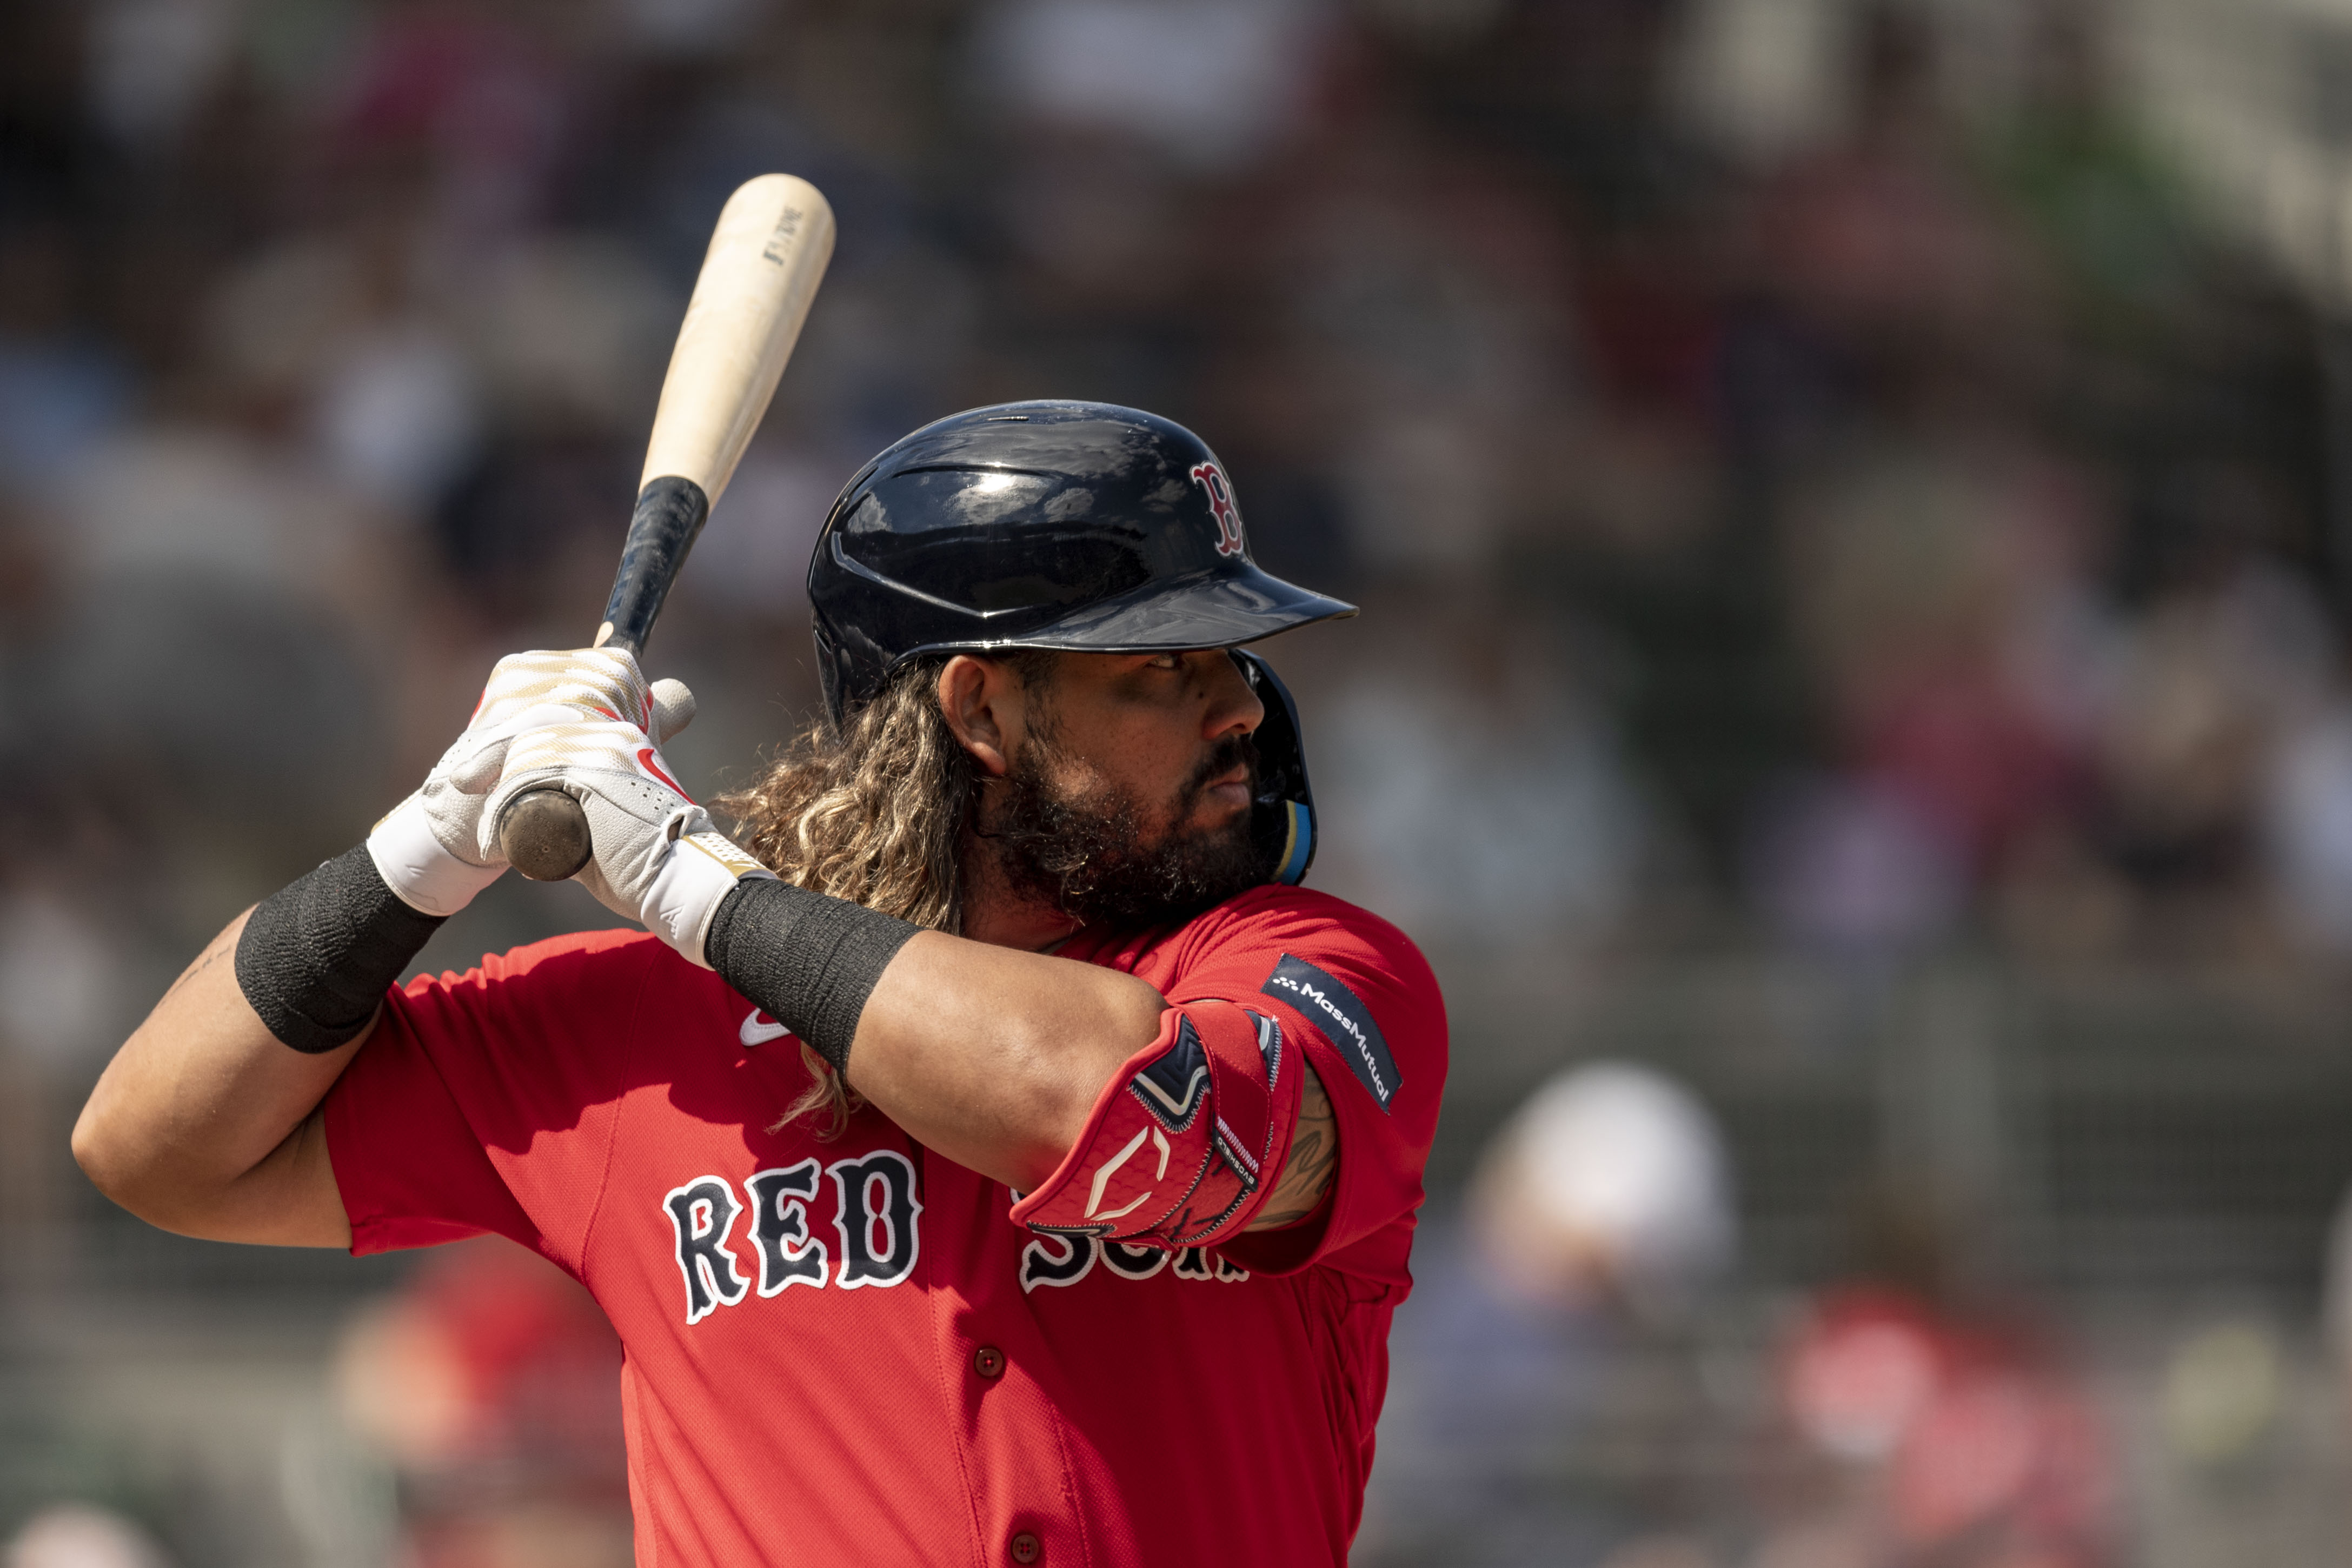 Red Sox's Jorge Alfaro has upward mobility clause, potentially